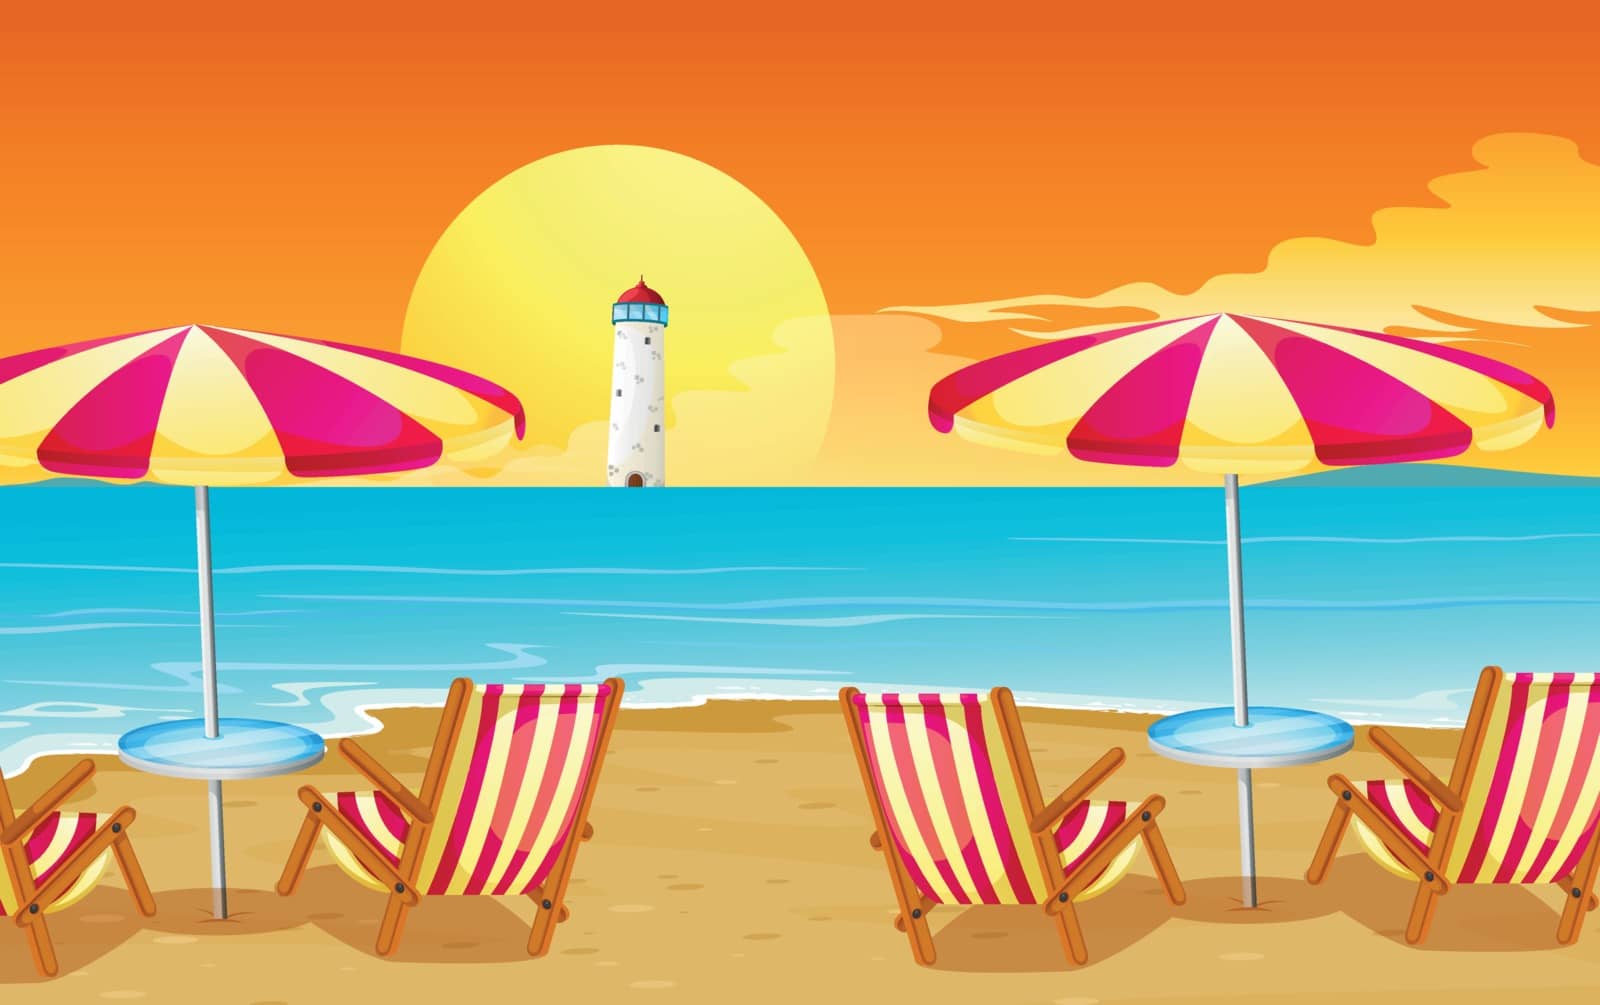 Illustration of the two umbrellas and four chairs at the beach